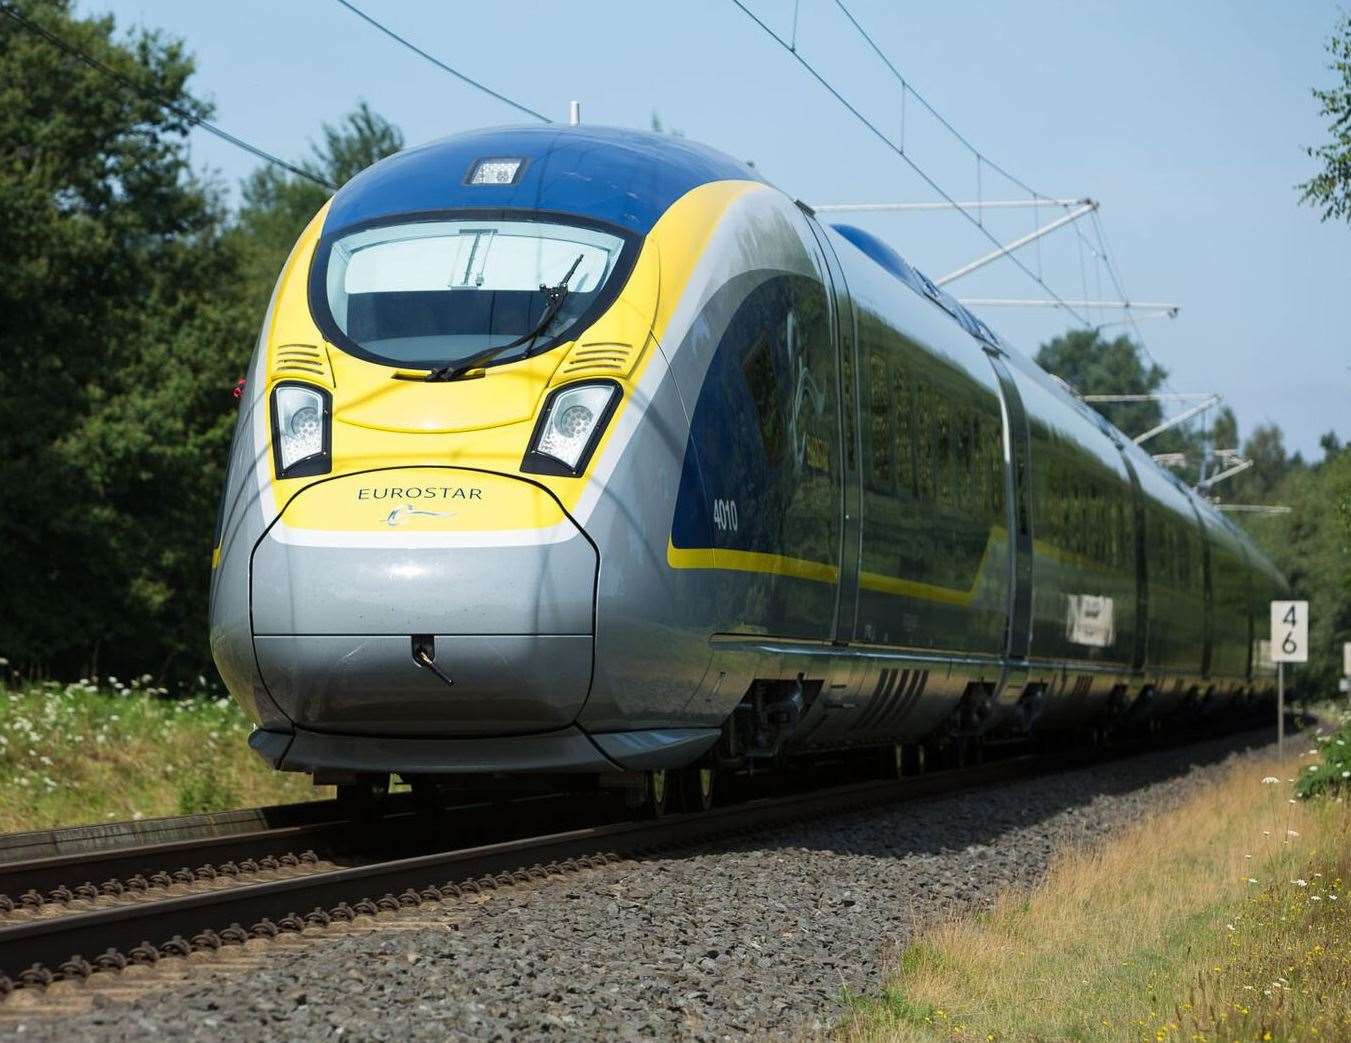 Eurostar trains haven’t stopped in Kent since 2020